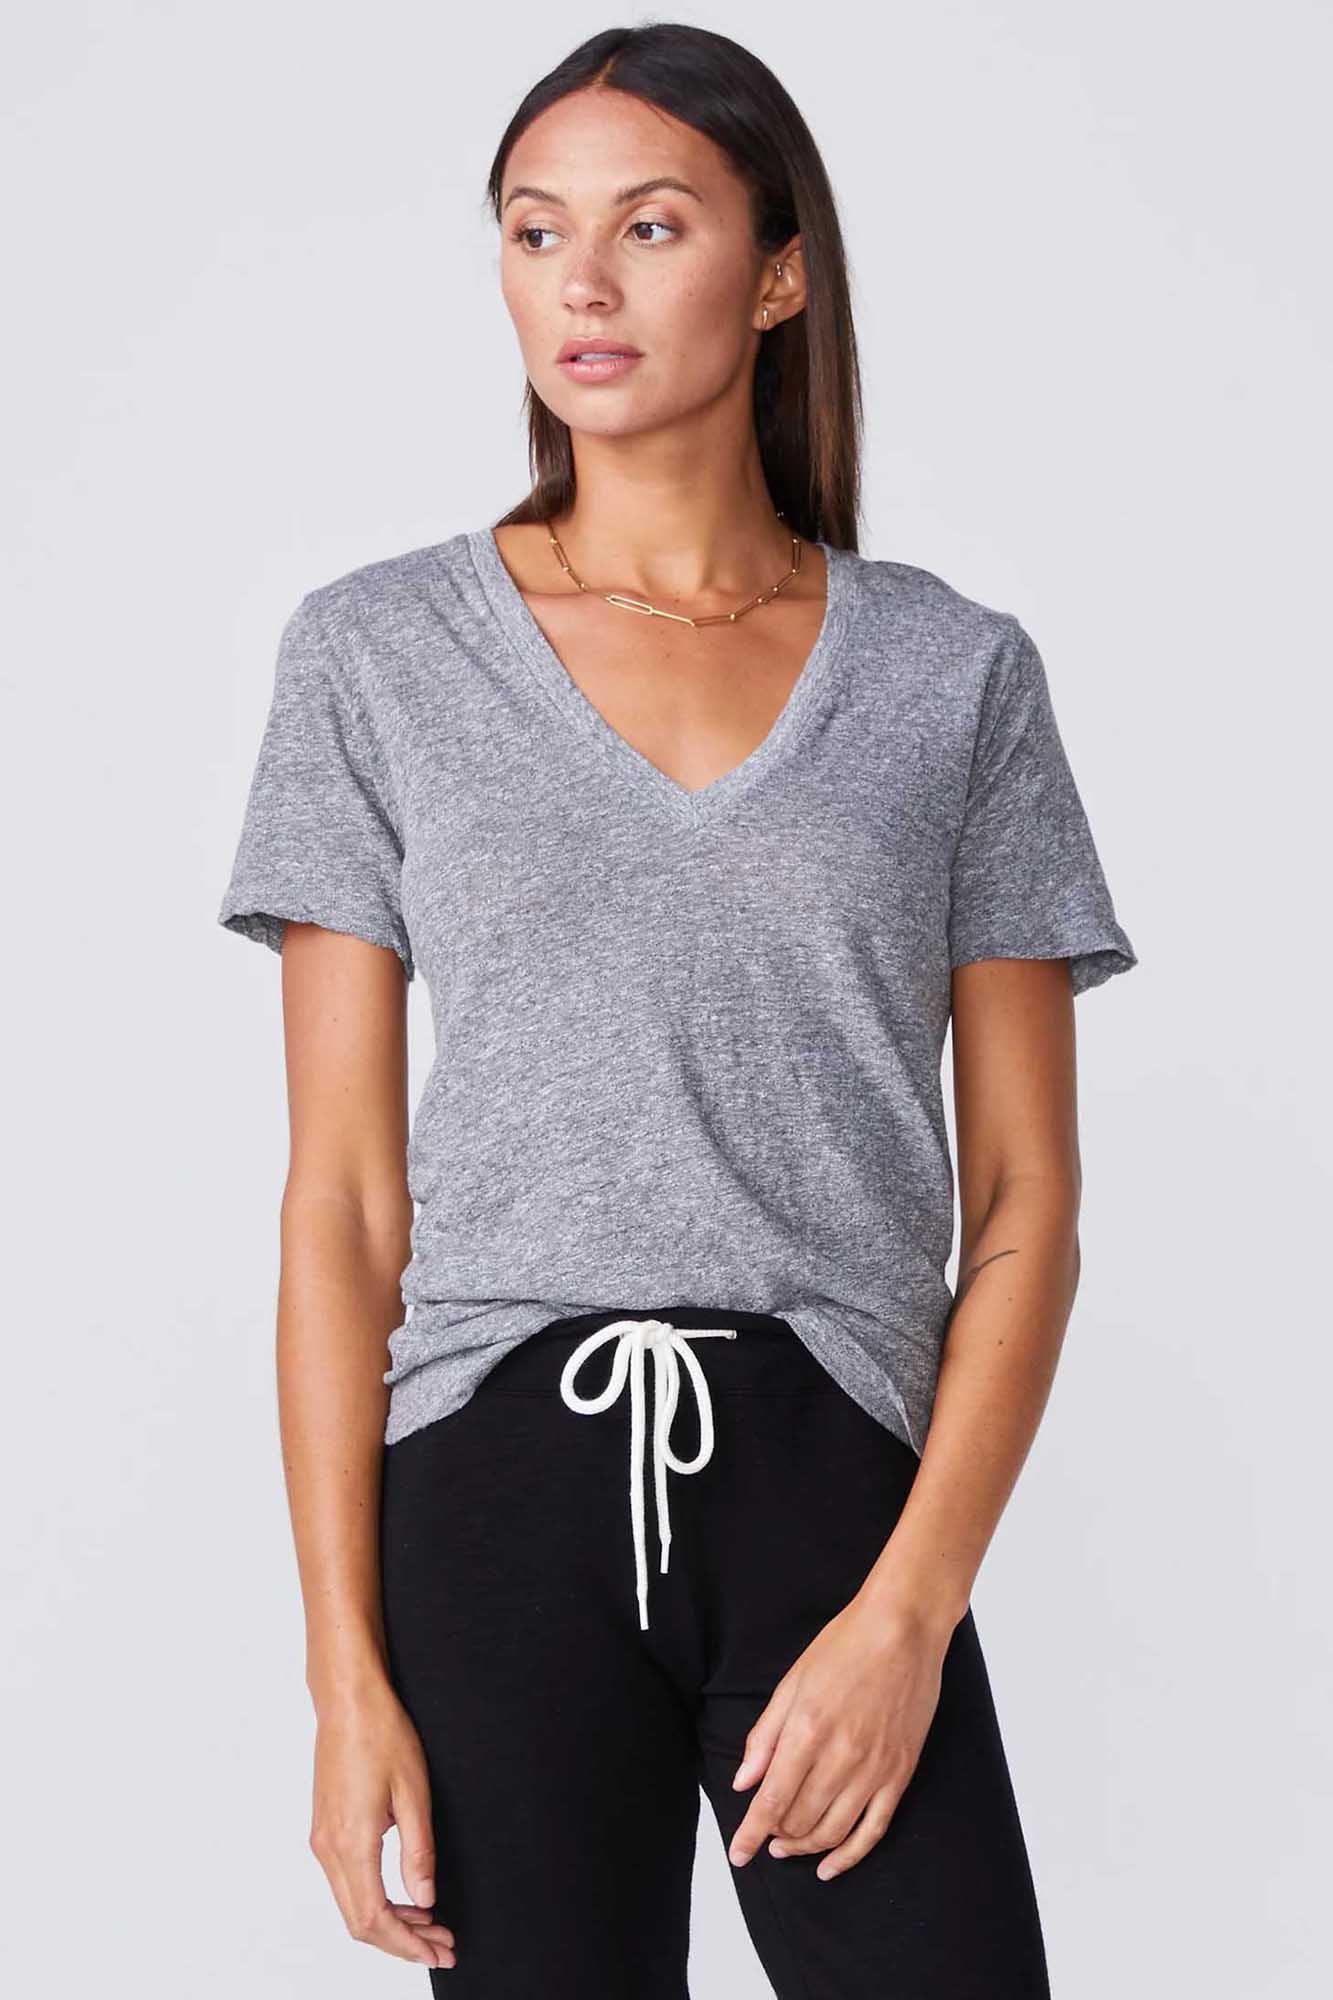 Textured Tri-Blend Fitted V Neck Tee